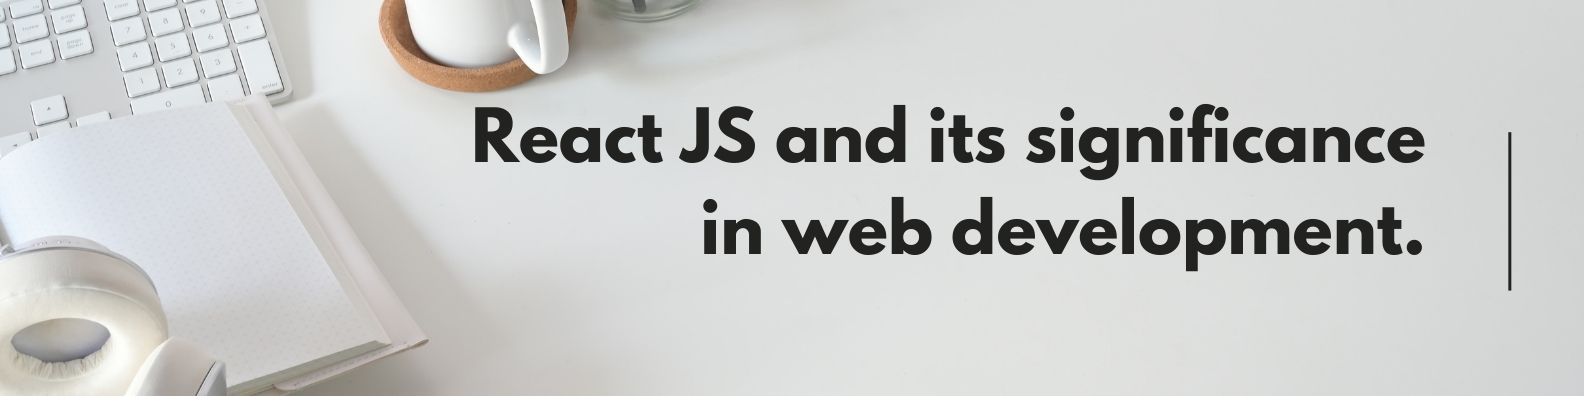 Overview of React JS and its significance in web development.